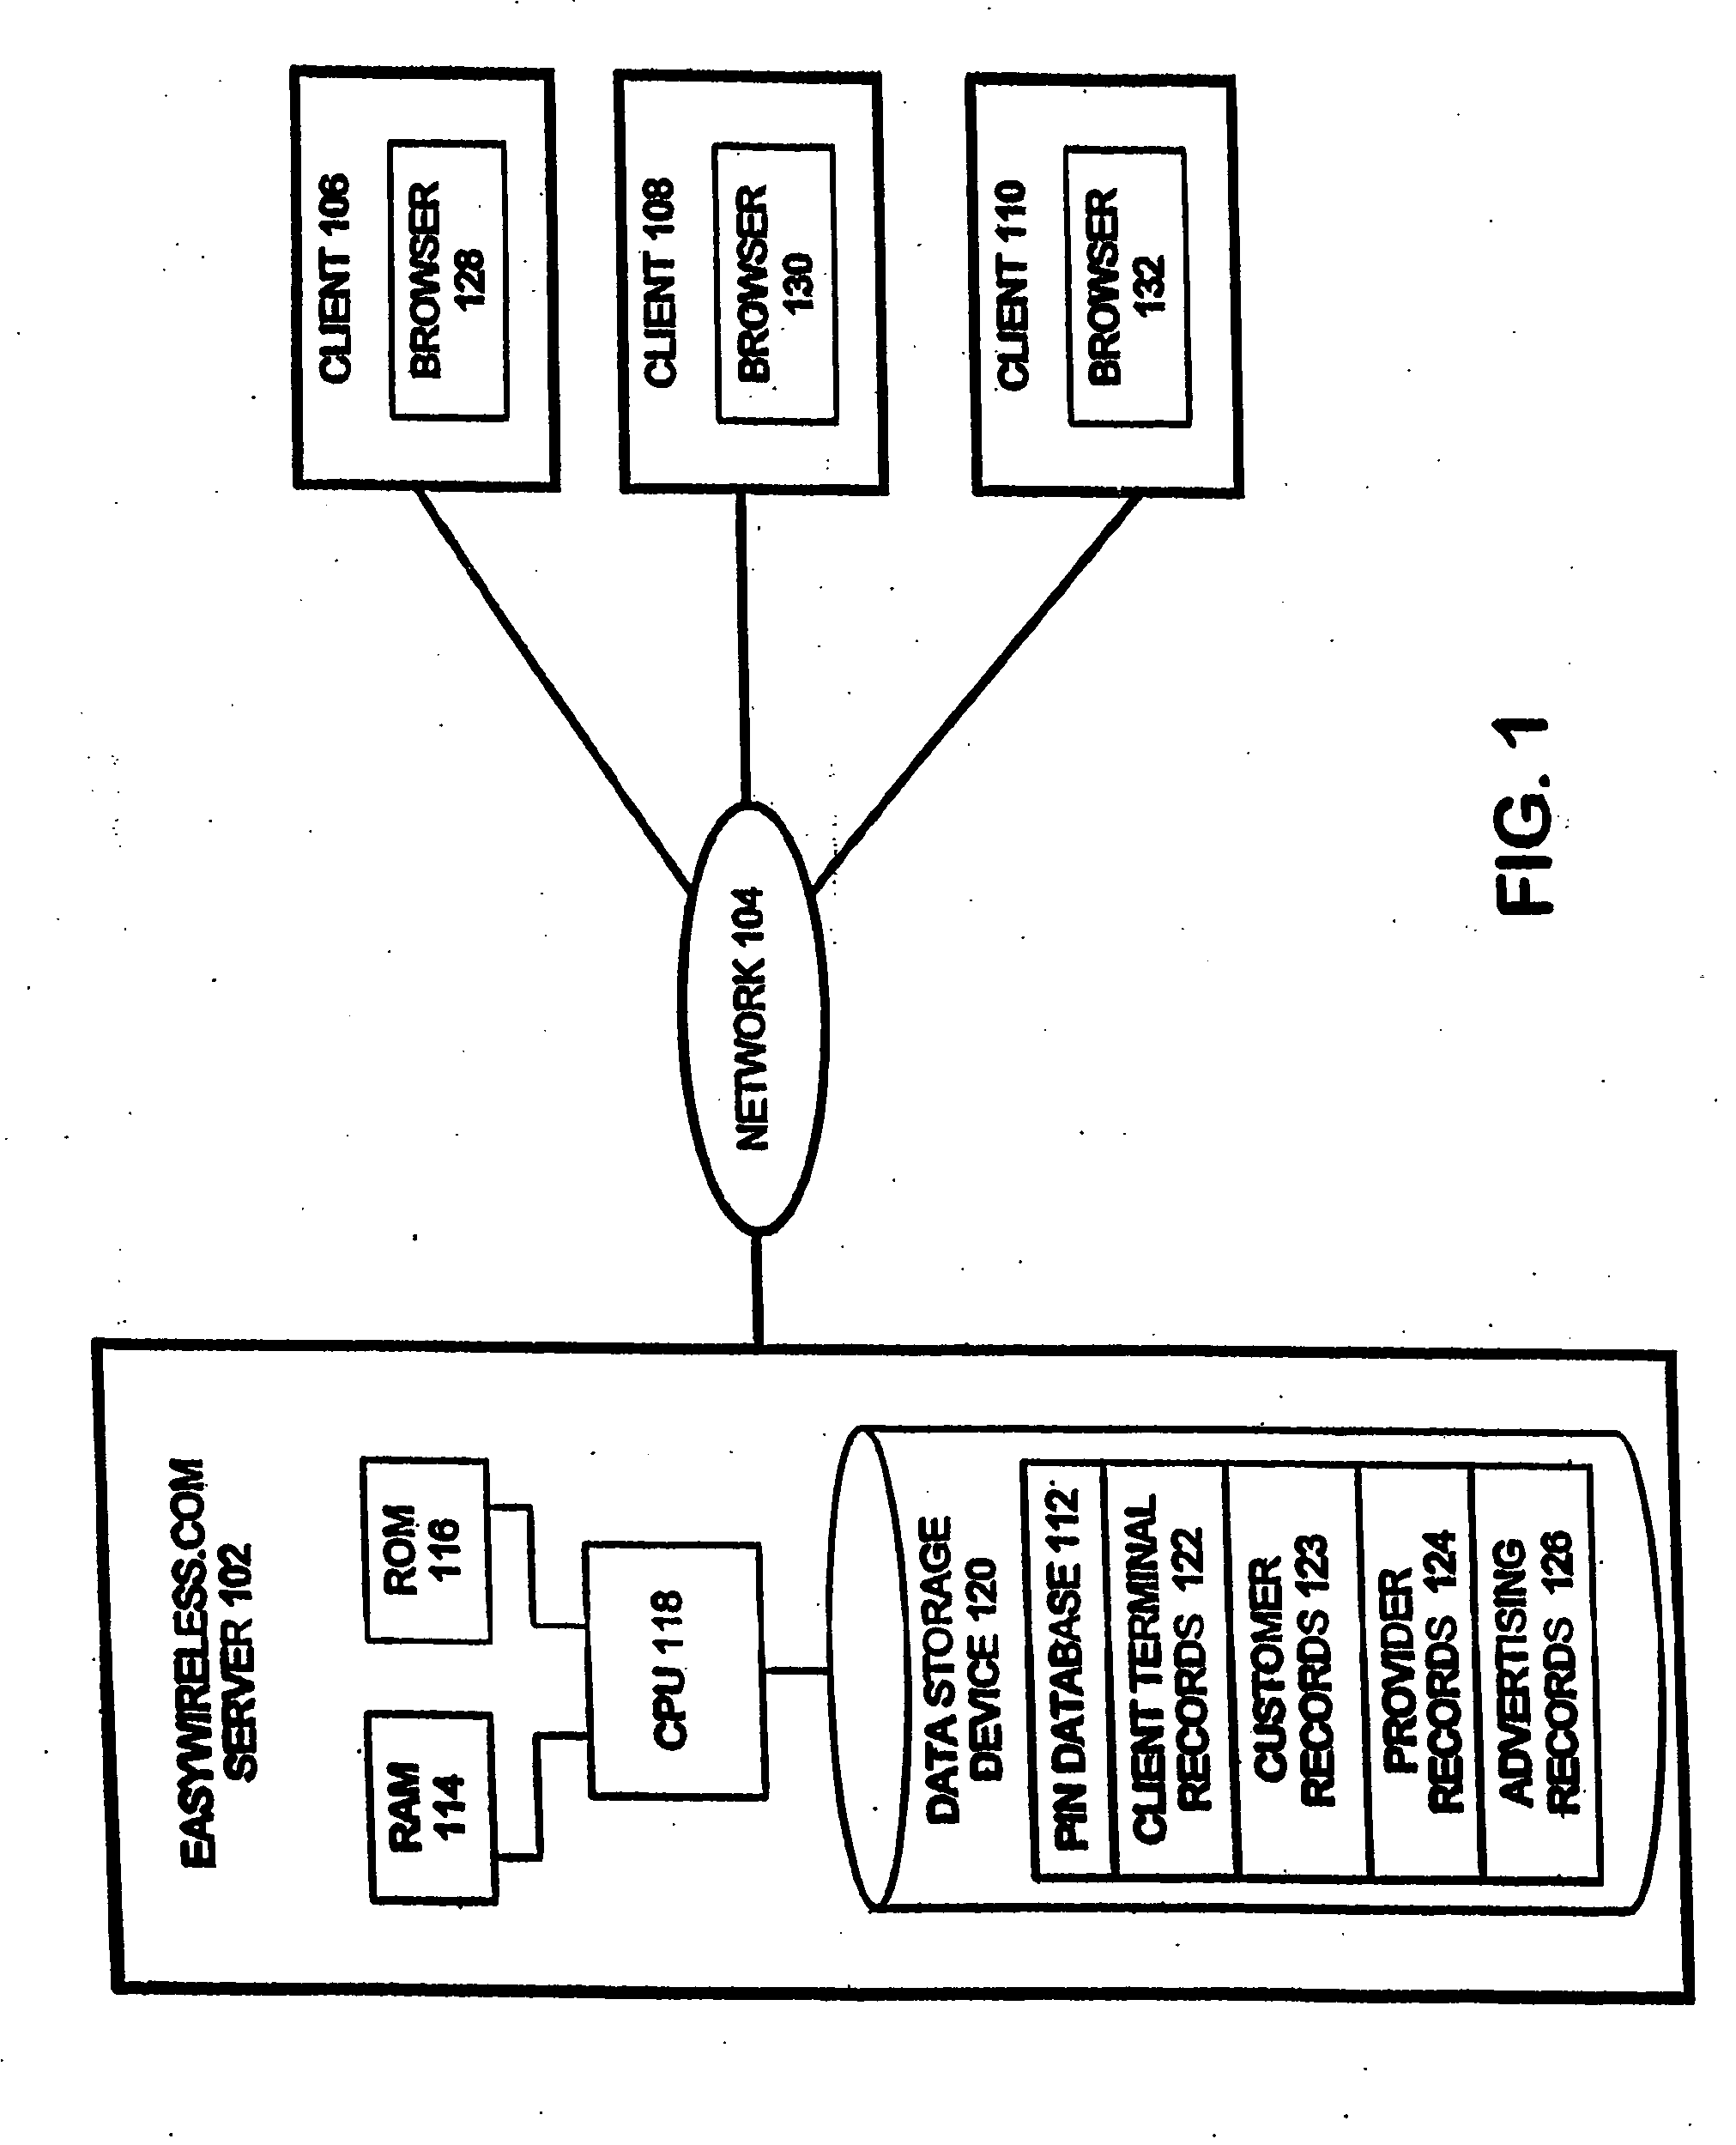 System and method for personal identification number distribution and delivery